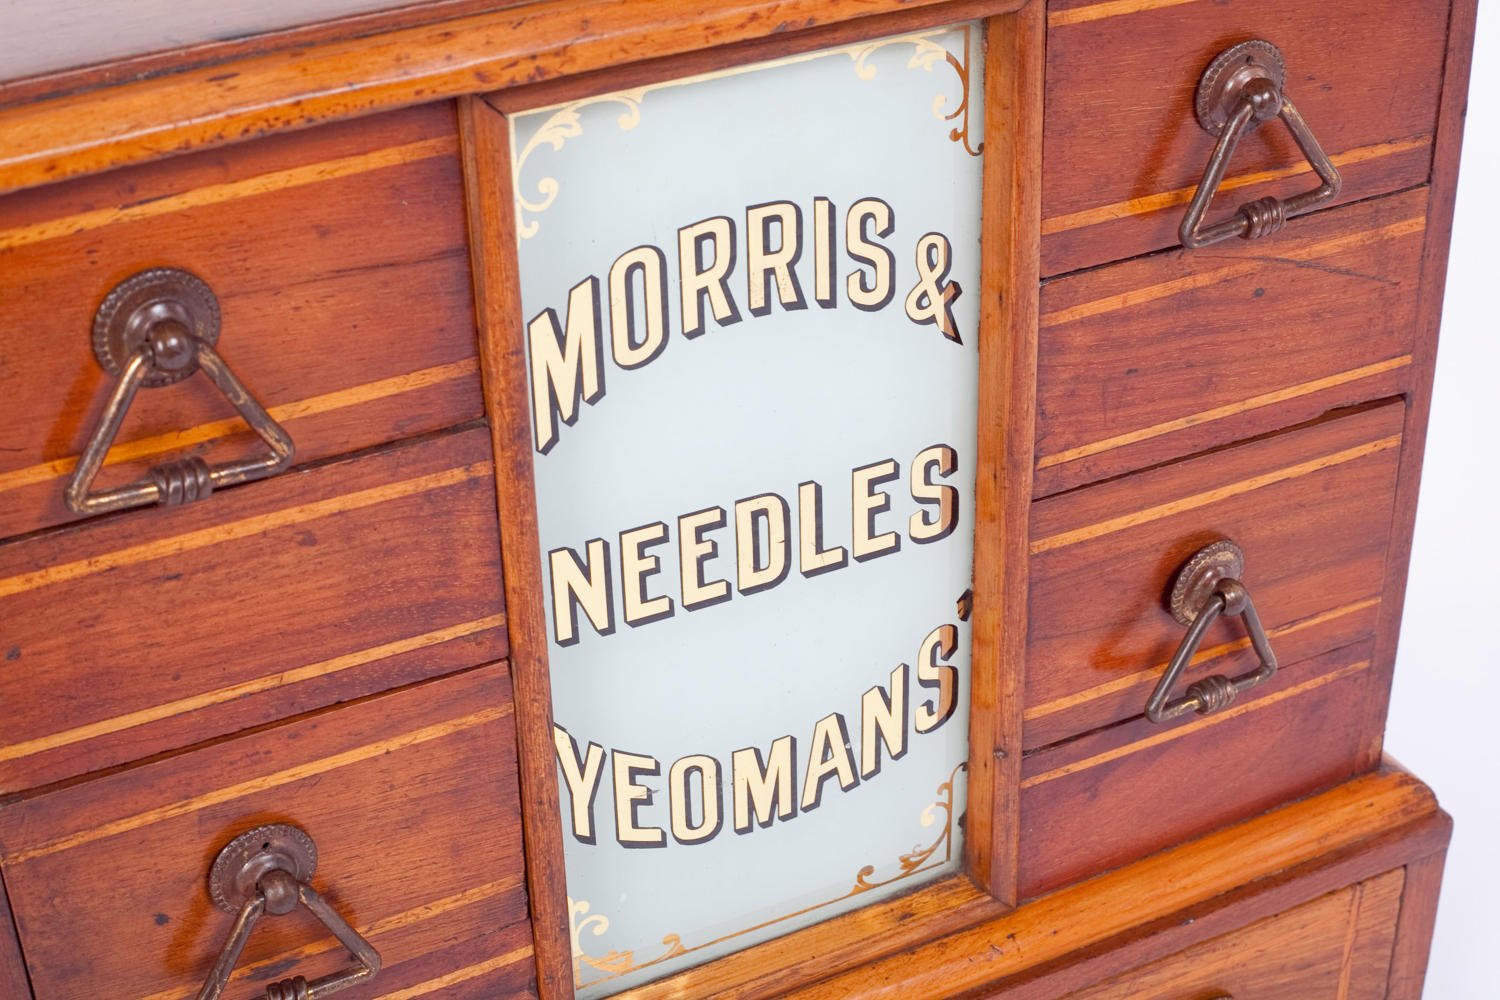 Shop counter display cabinet for Morris & Yeomans' Needles.